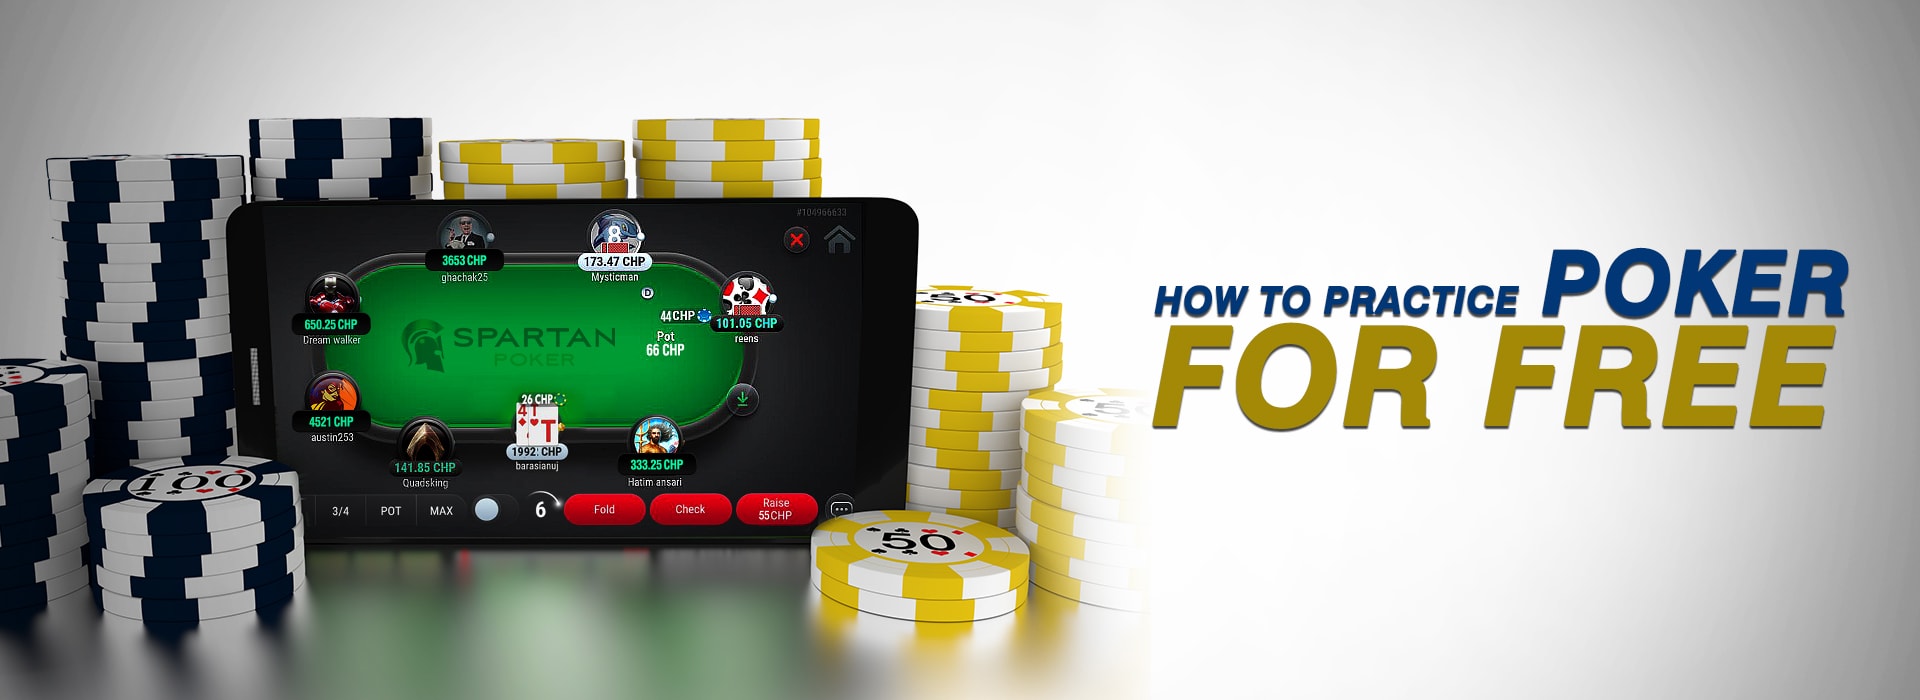 How To Play Poker For Free